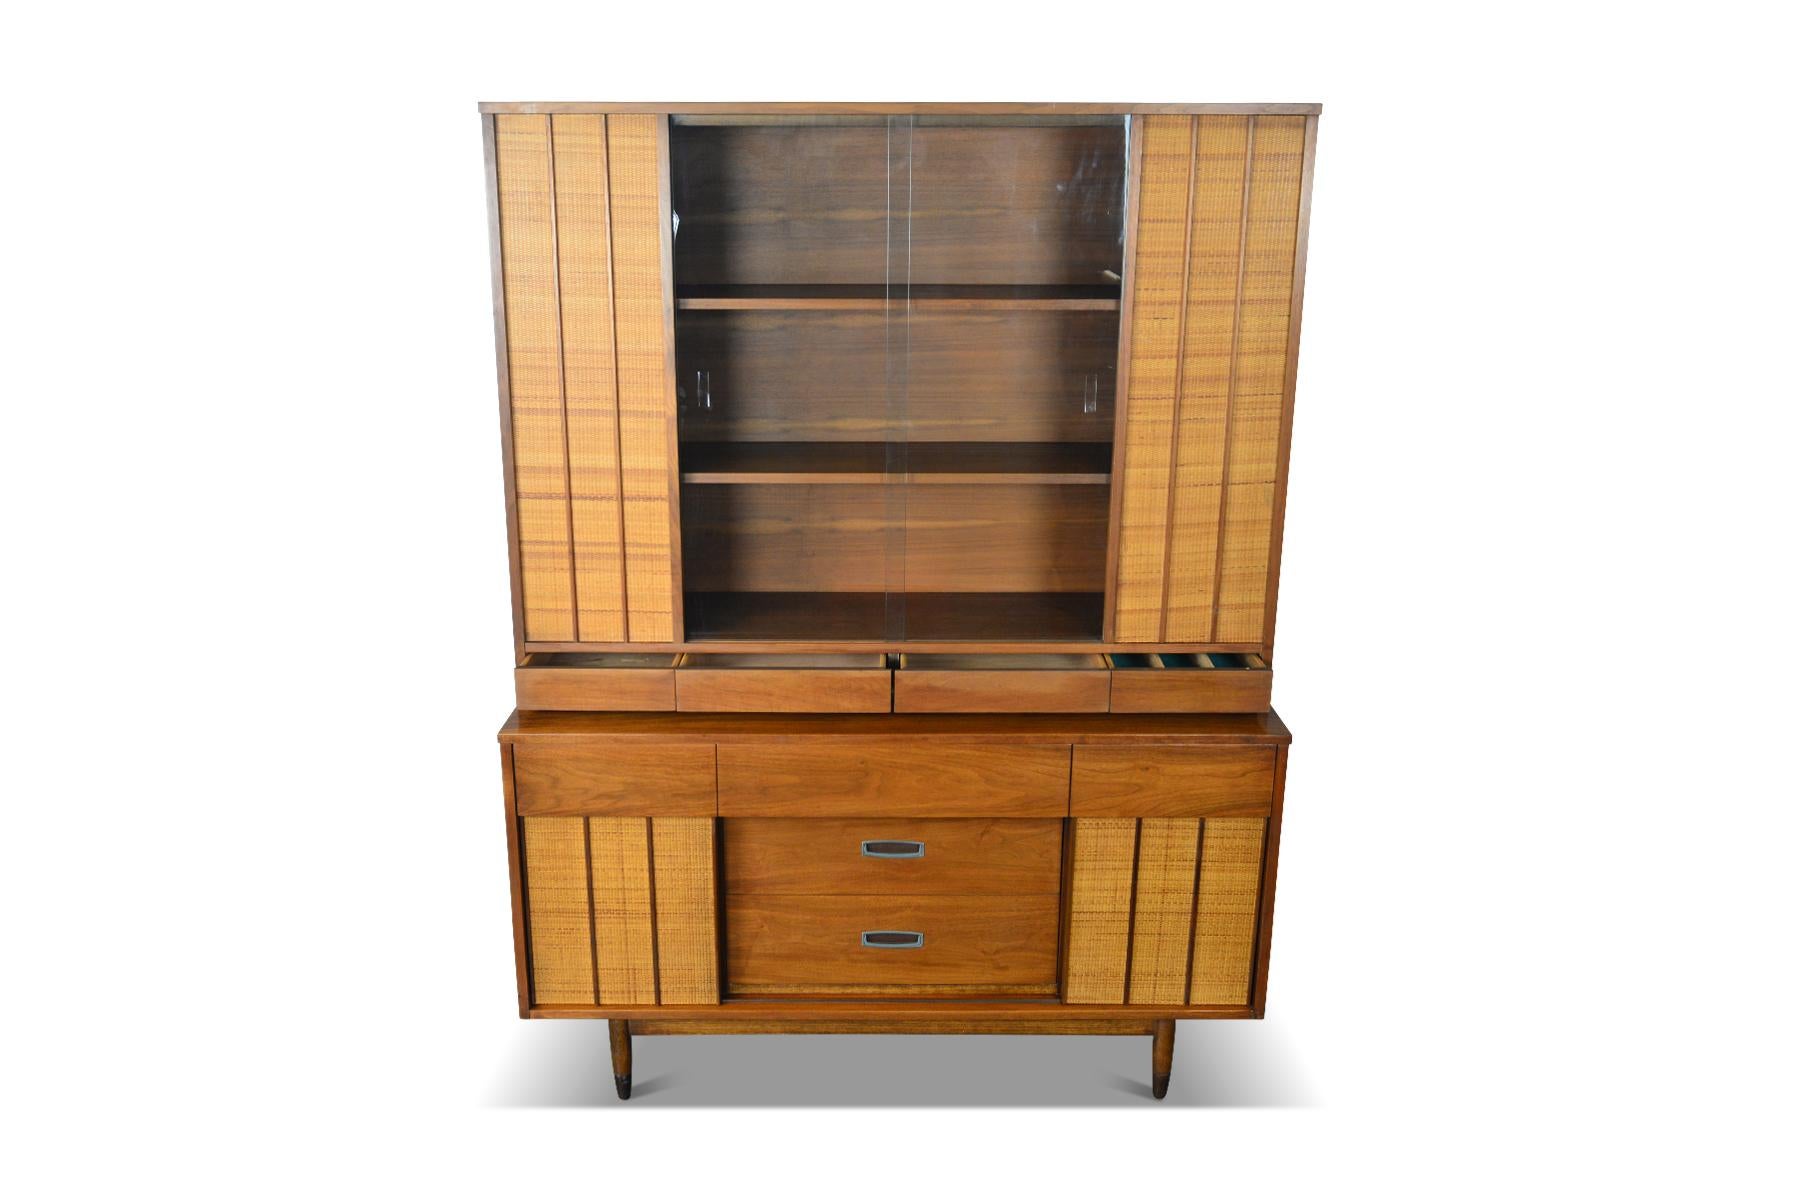 20th Century American Mid-Century Modern Walnut and Cane Credenza with Hutch